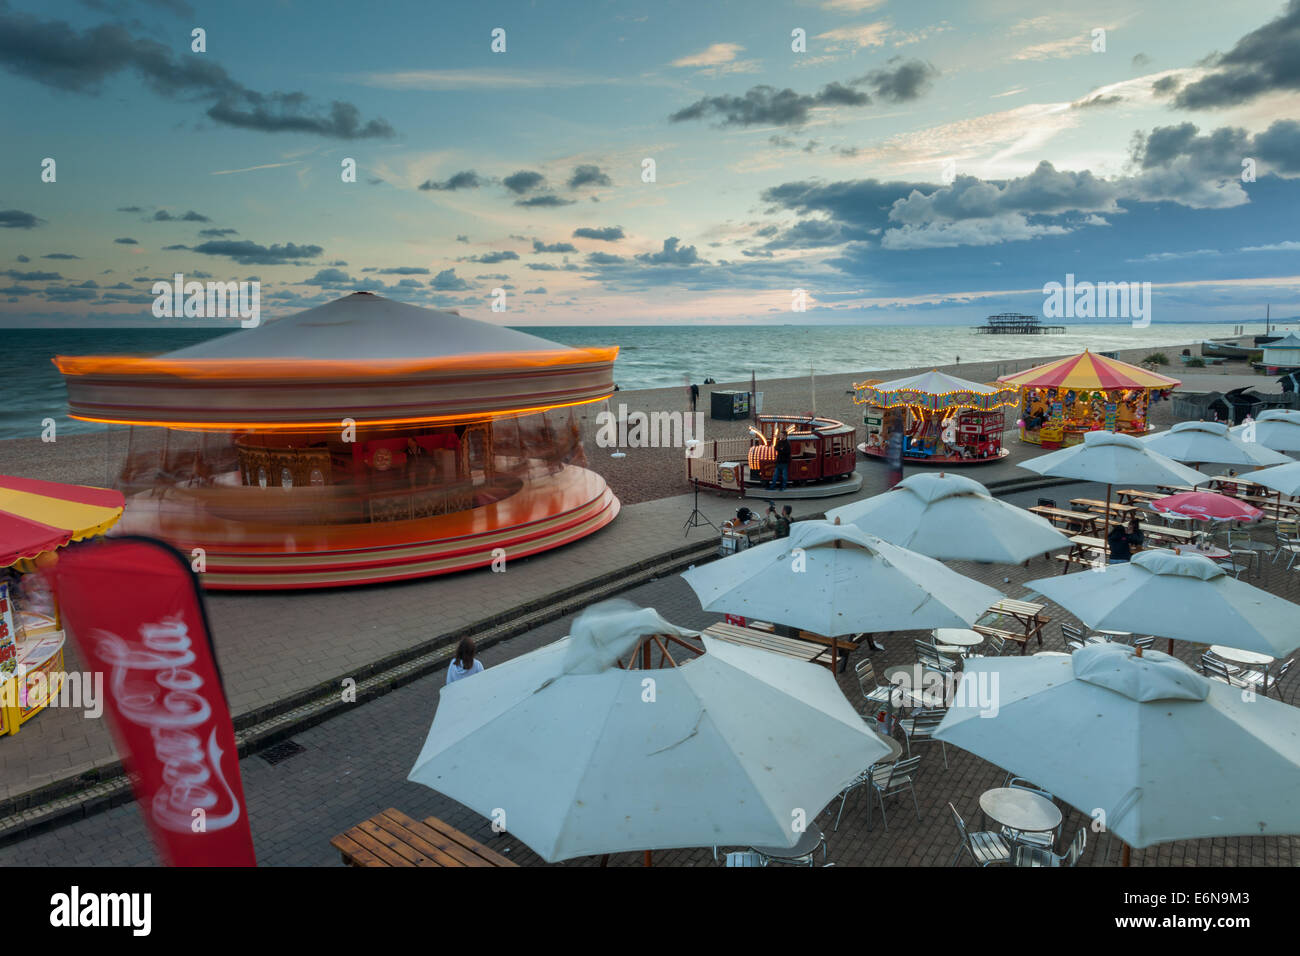 Late summer evening on the seafront in Brighton, England. Stock Photo